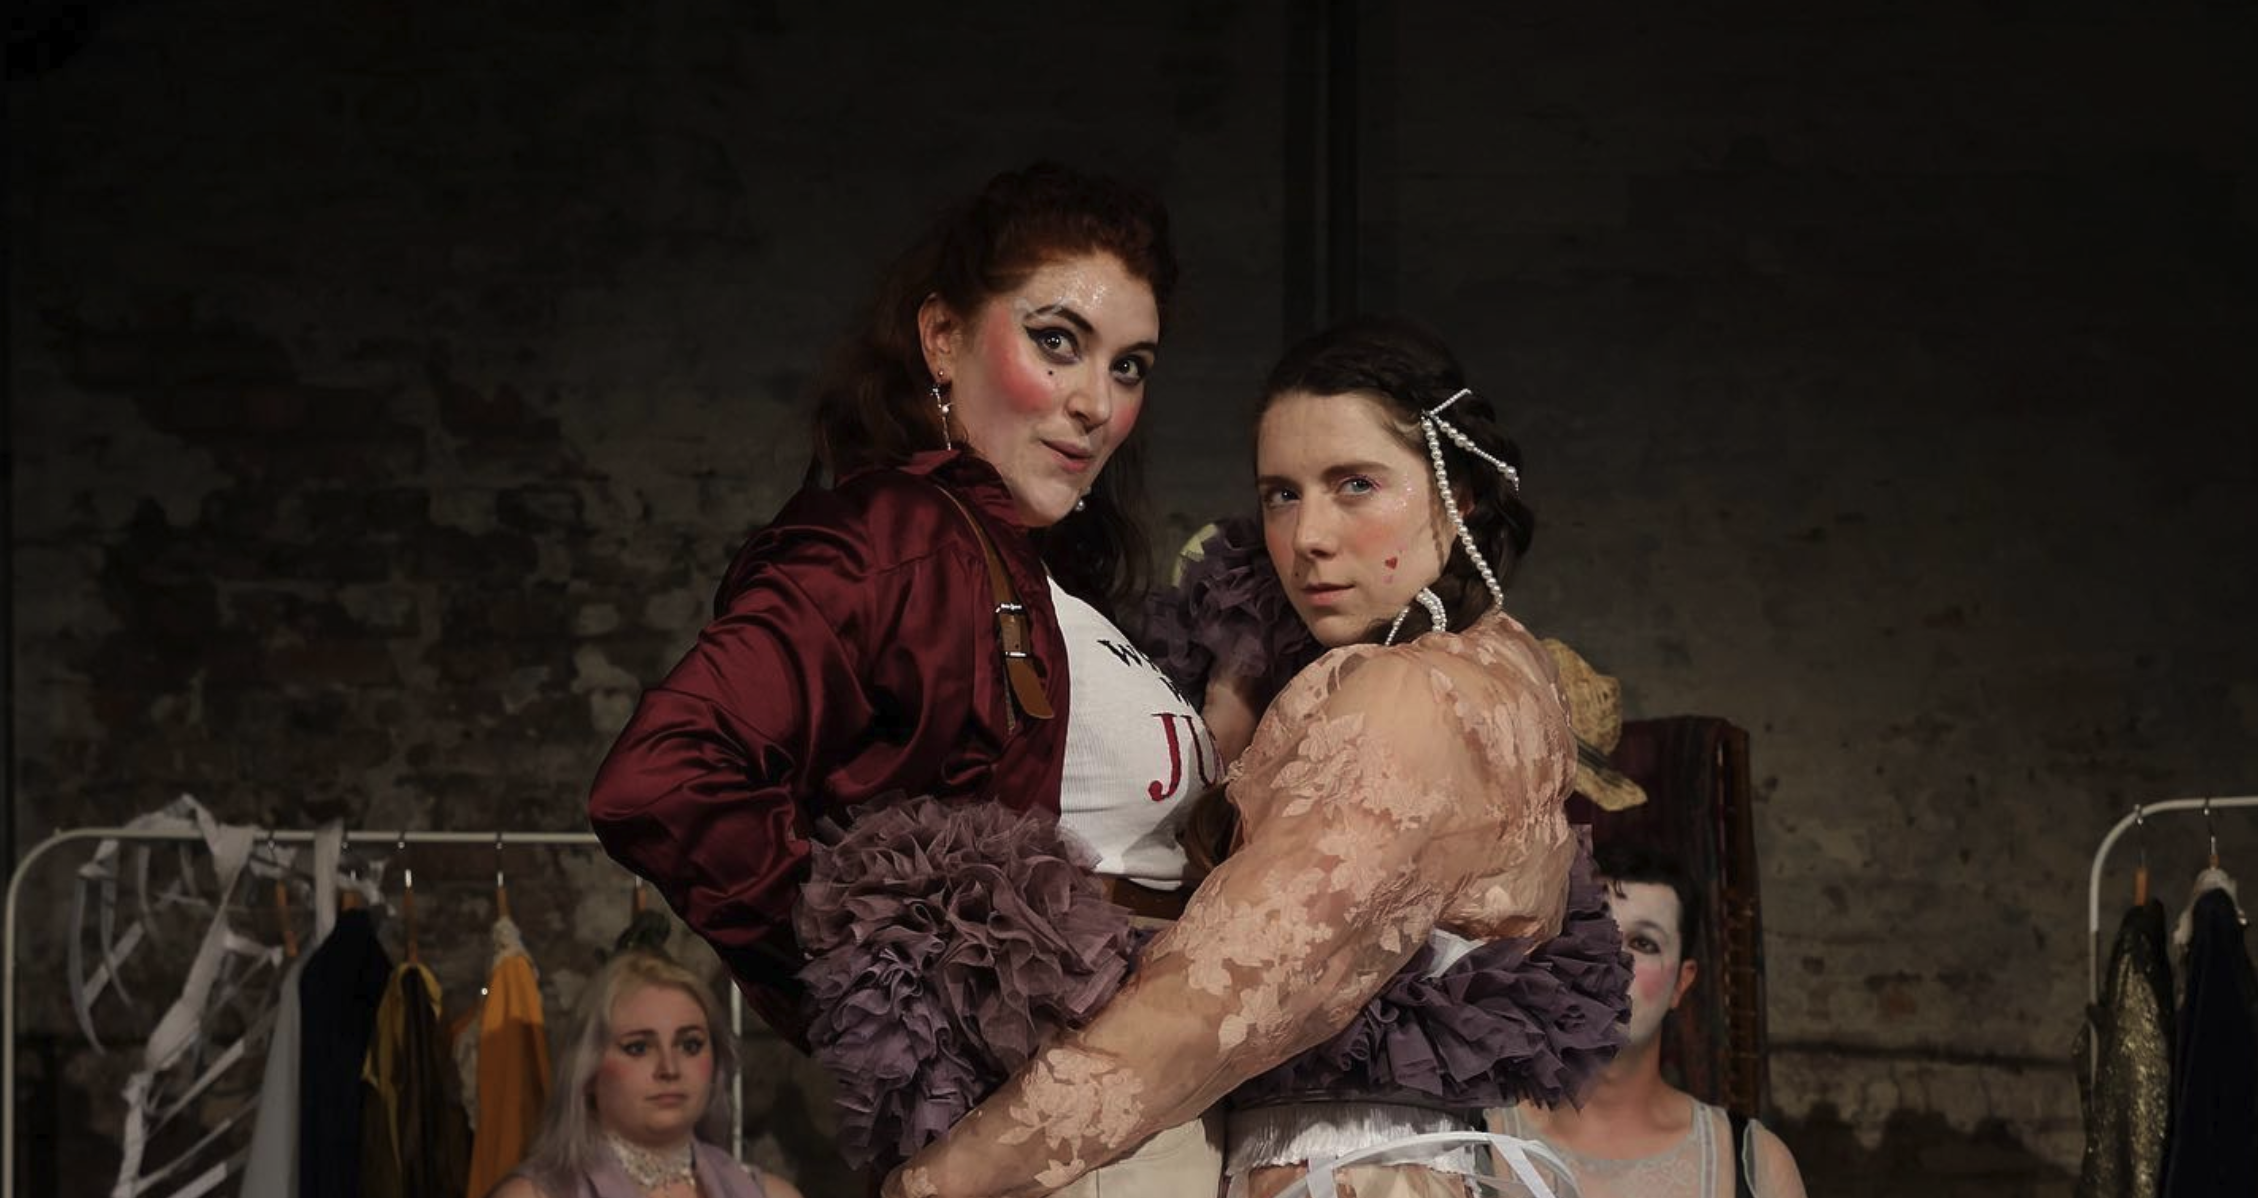 Two performers stand closely, facing the camera with confident expressions. Both sport dramatic makeup and unique costumes; the person on the left wears a maroon jacket and tutu, while the one on the right dons lace attire with ribbons. Other costumed people are visible in the background.